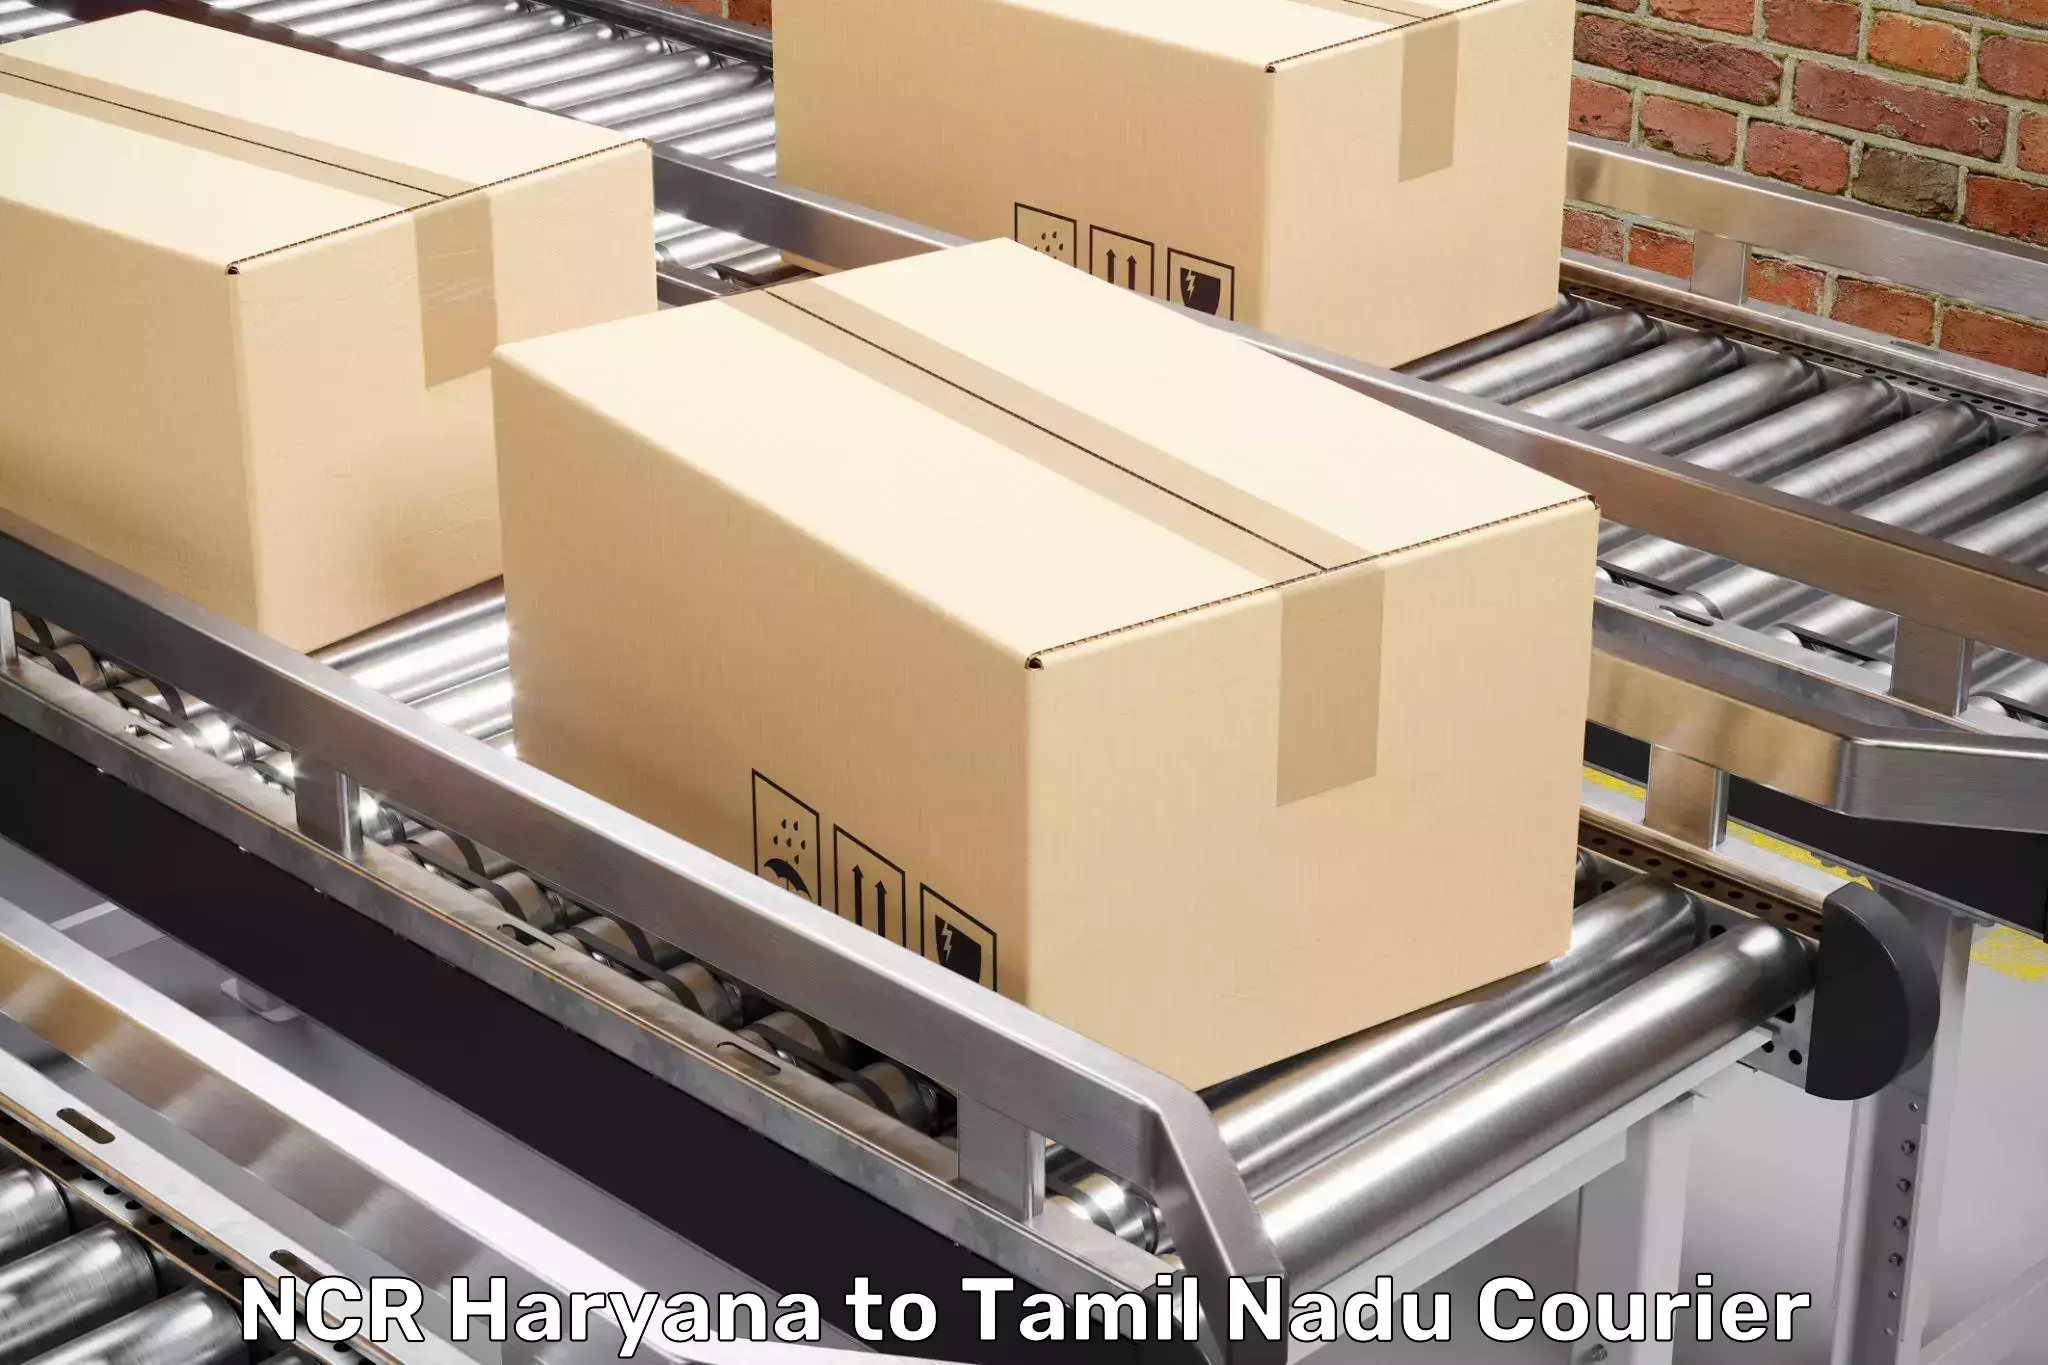 Advanced moving services NCR Haryana to Gobichettipalayam